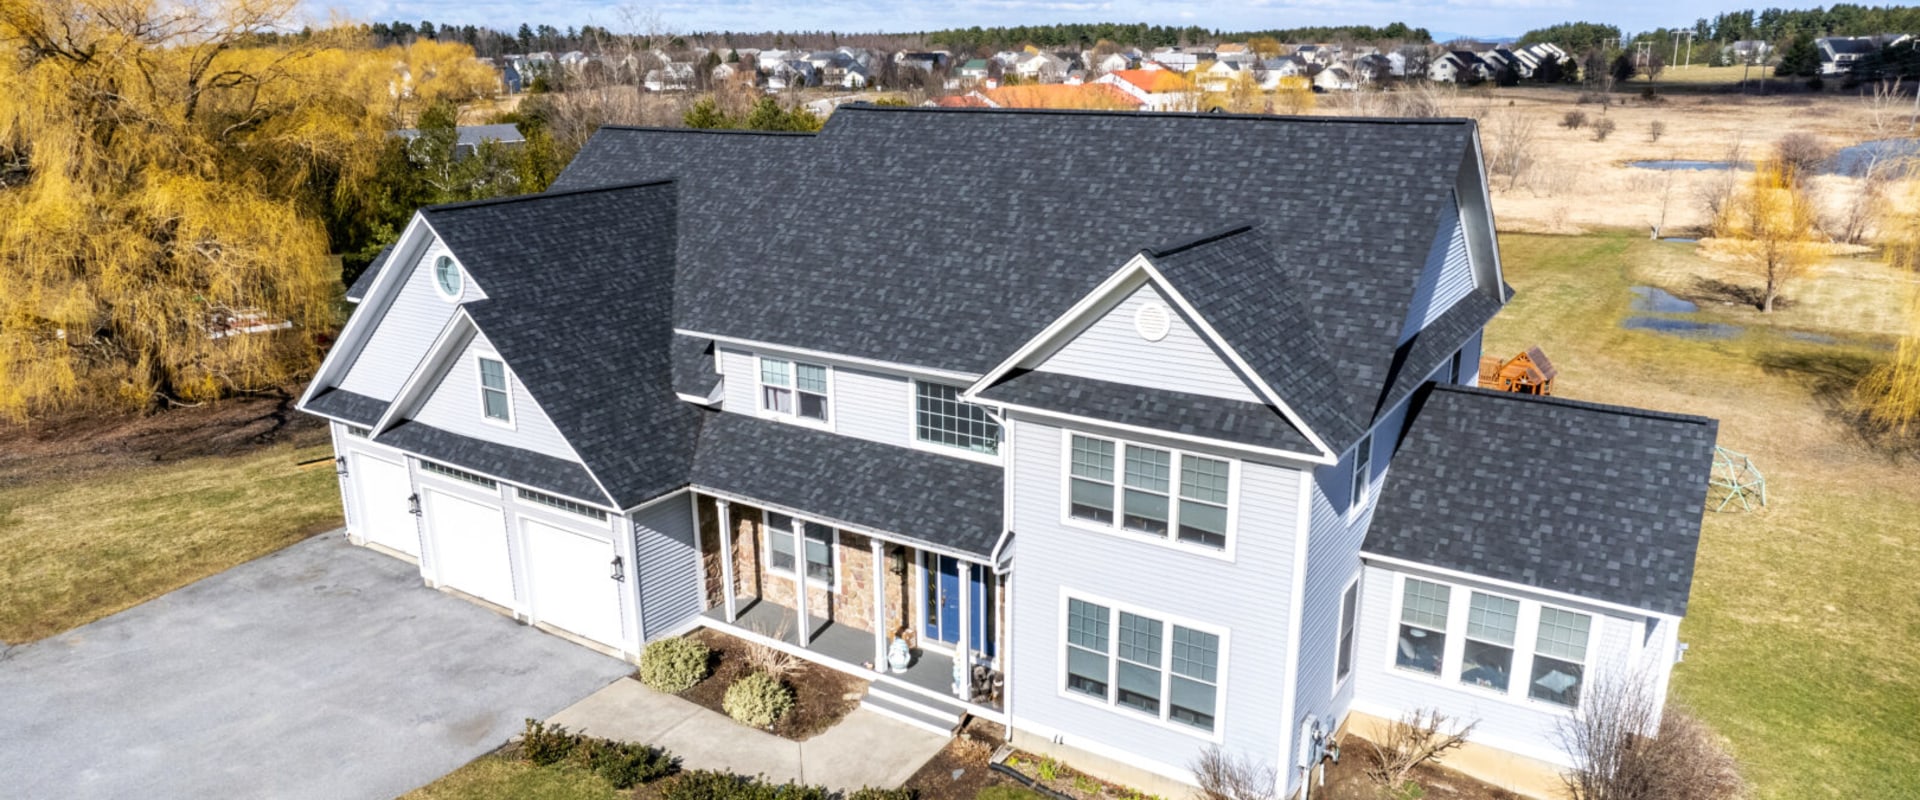 What is the average lifespan of a roof?